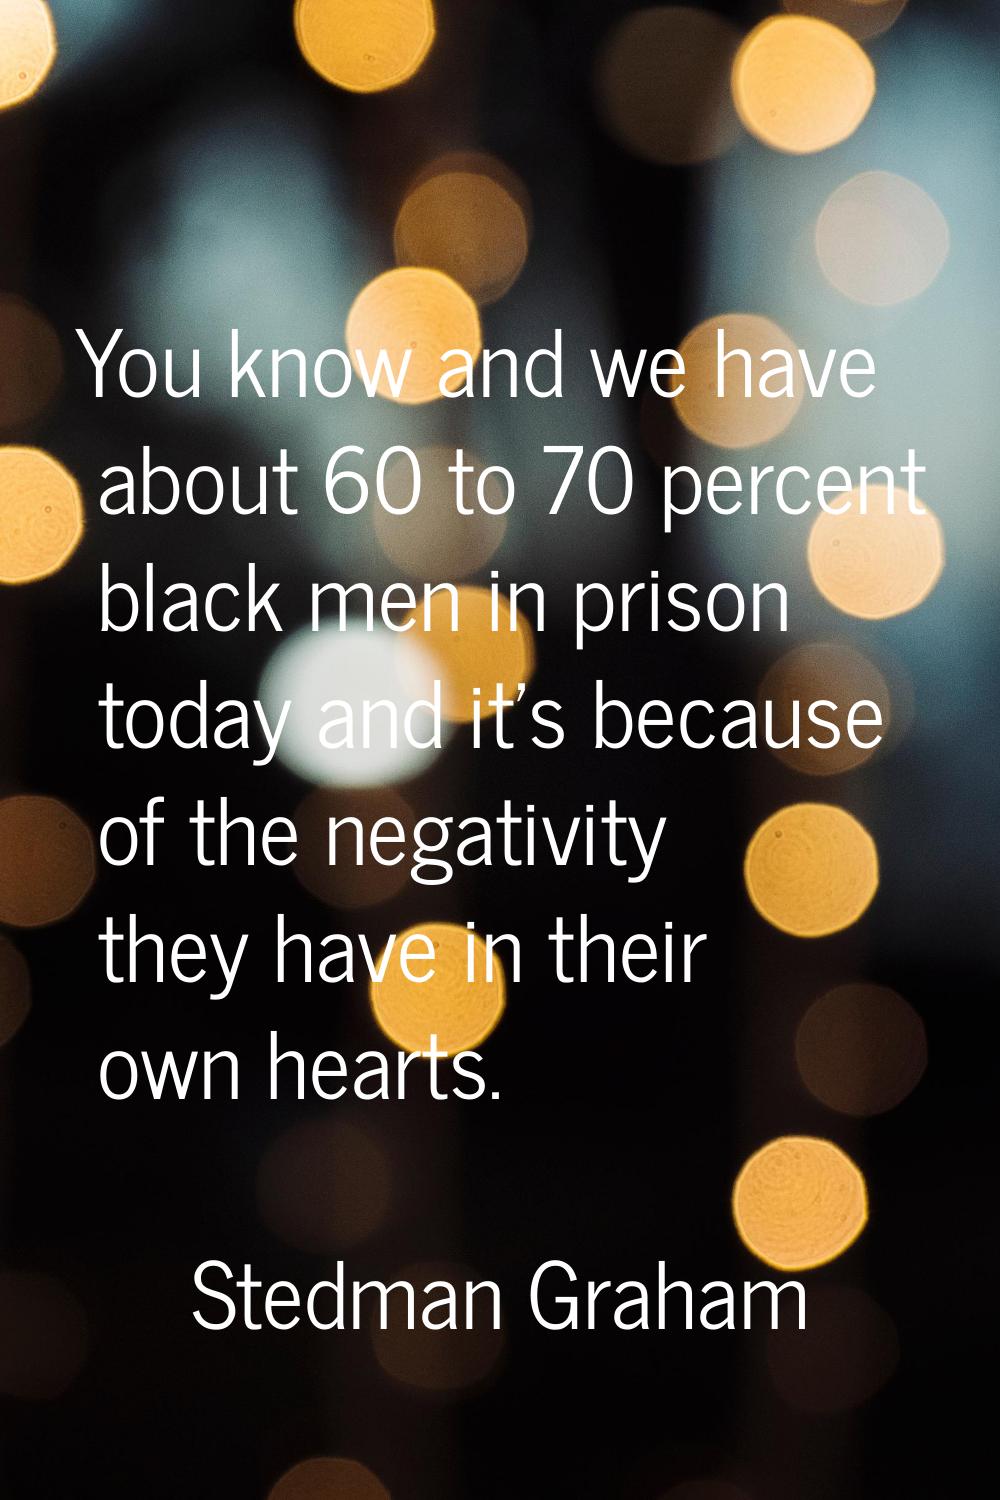 You know and we have about 60 to 70 percent black men in prison today and it's because of the negat